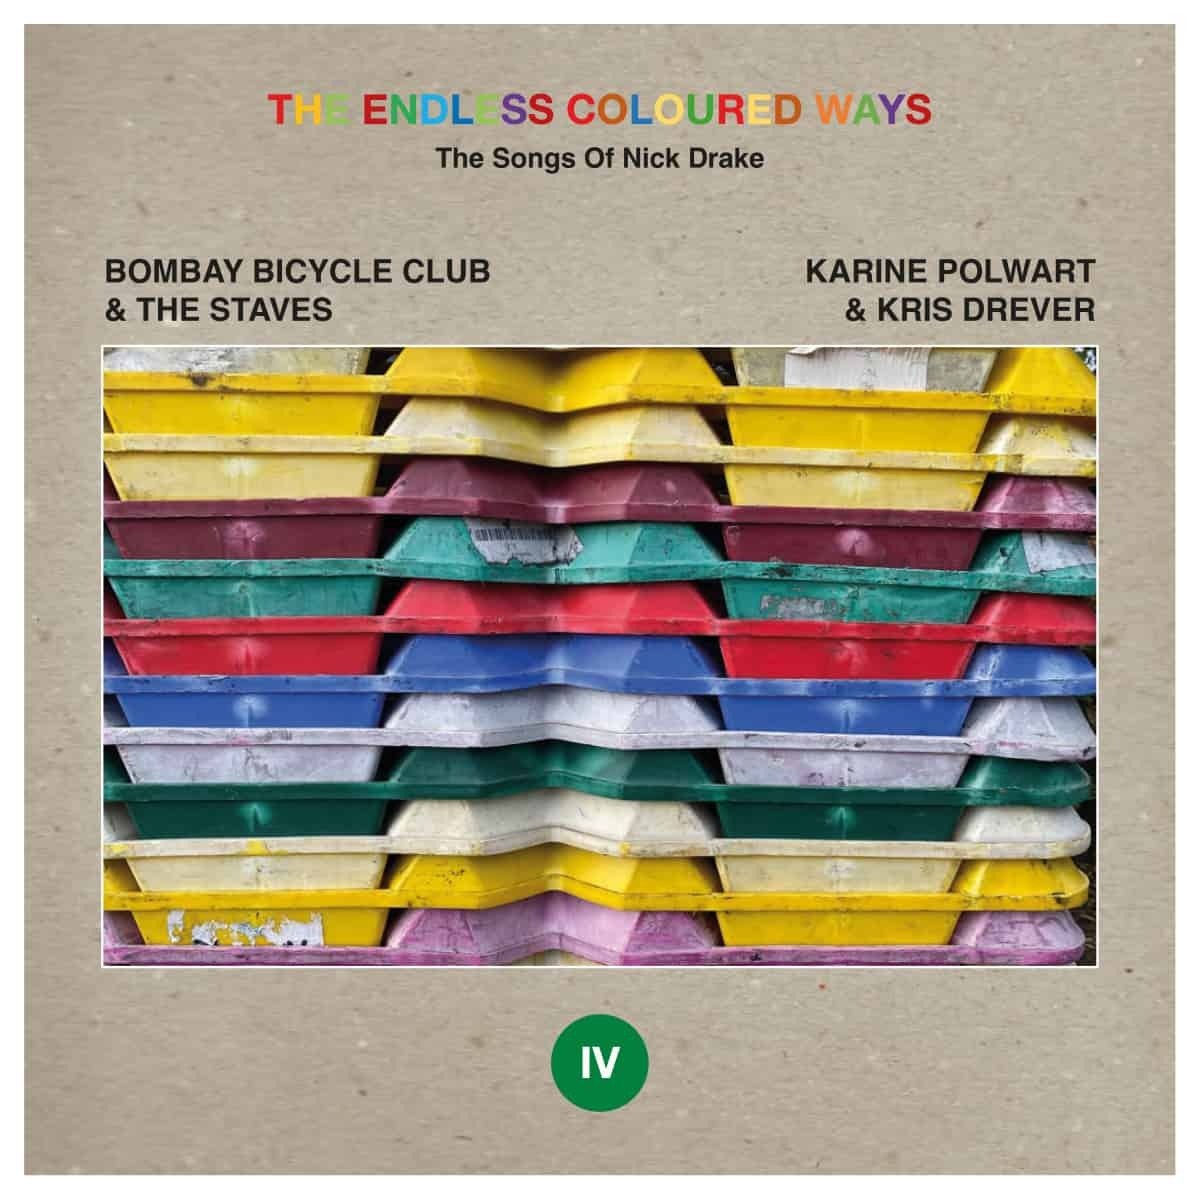 CD Shop - BOMBAY BICYCLECLUB & THE 7-THE ENDLESS COLOURED WAYS: THE SONGS OF NICK DRAKE IV